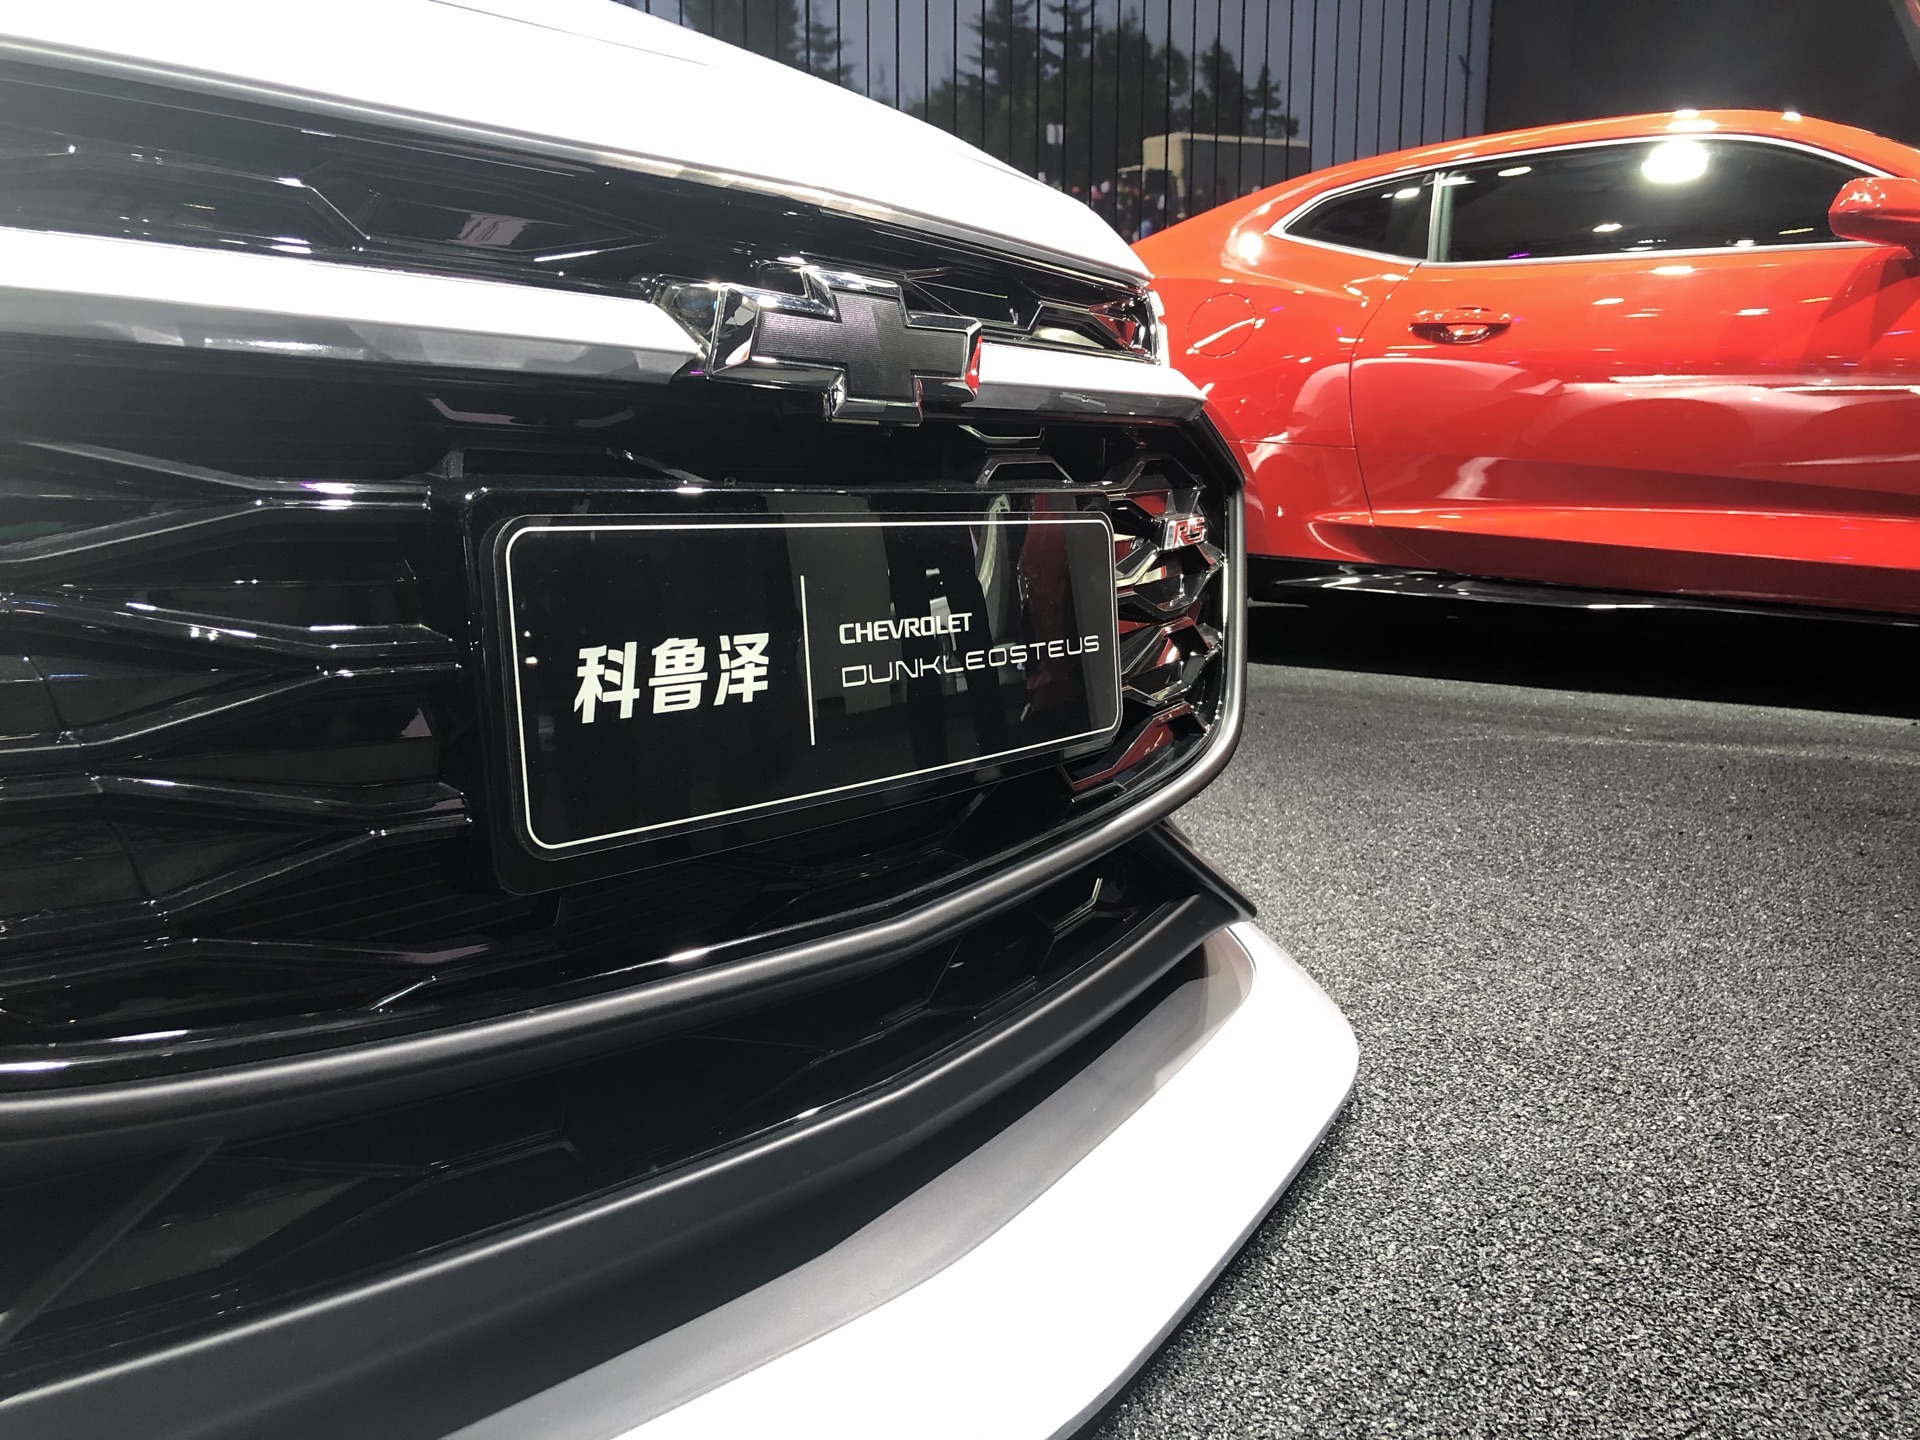 Guangzhou Auto Show 2019 Highlights How China Is Changing